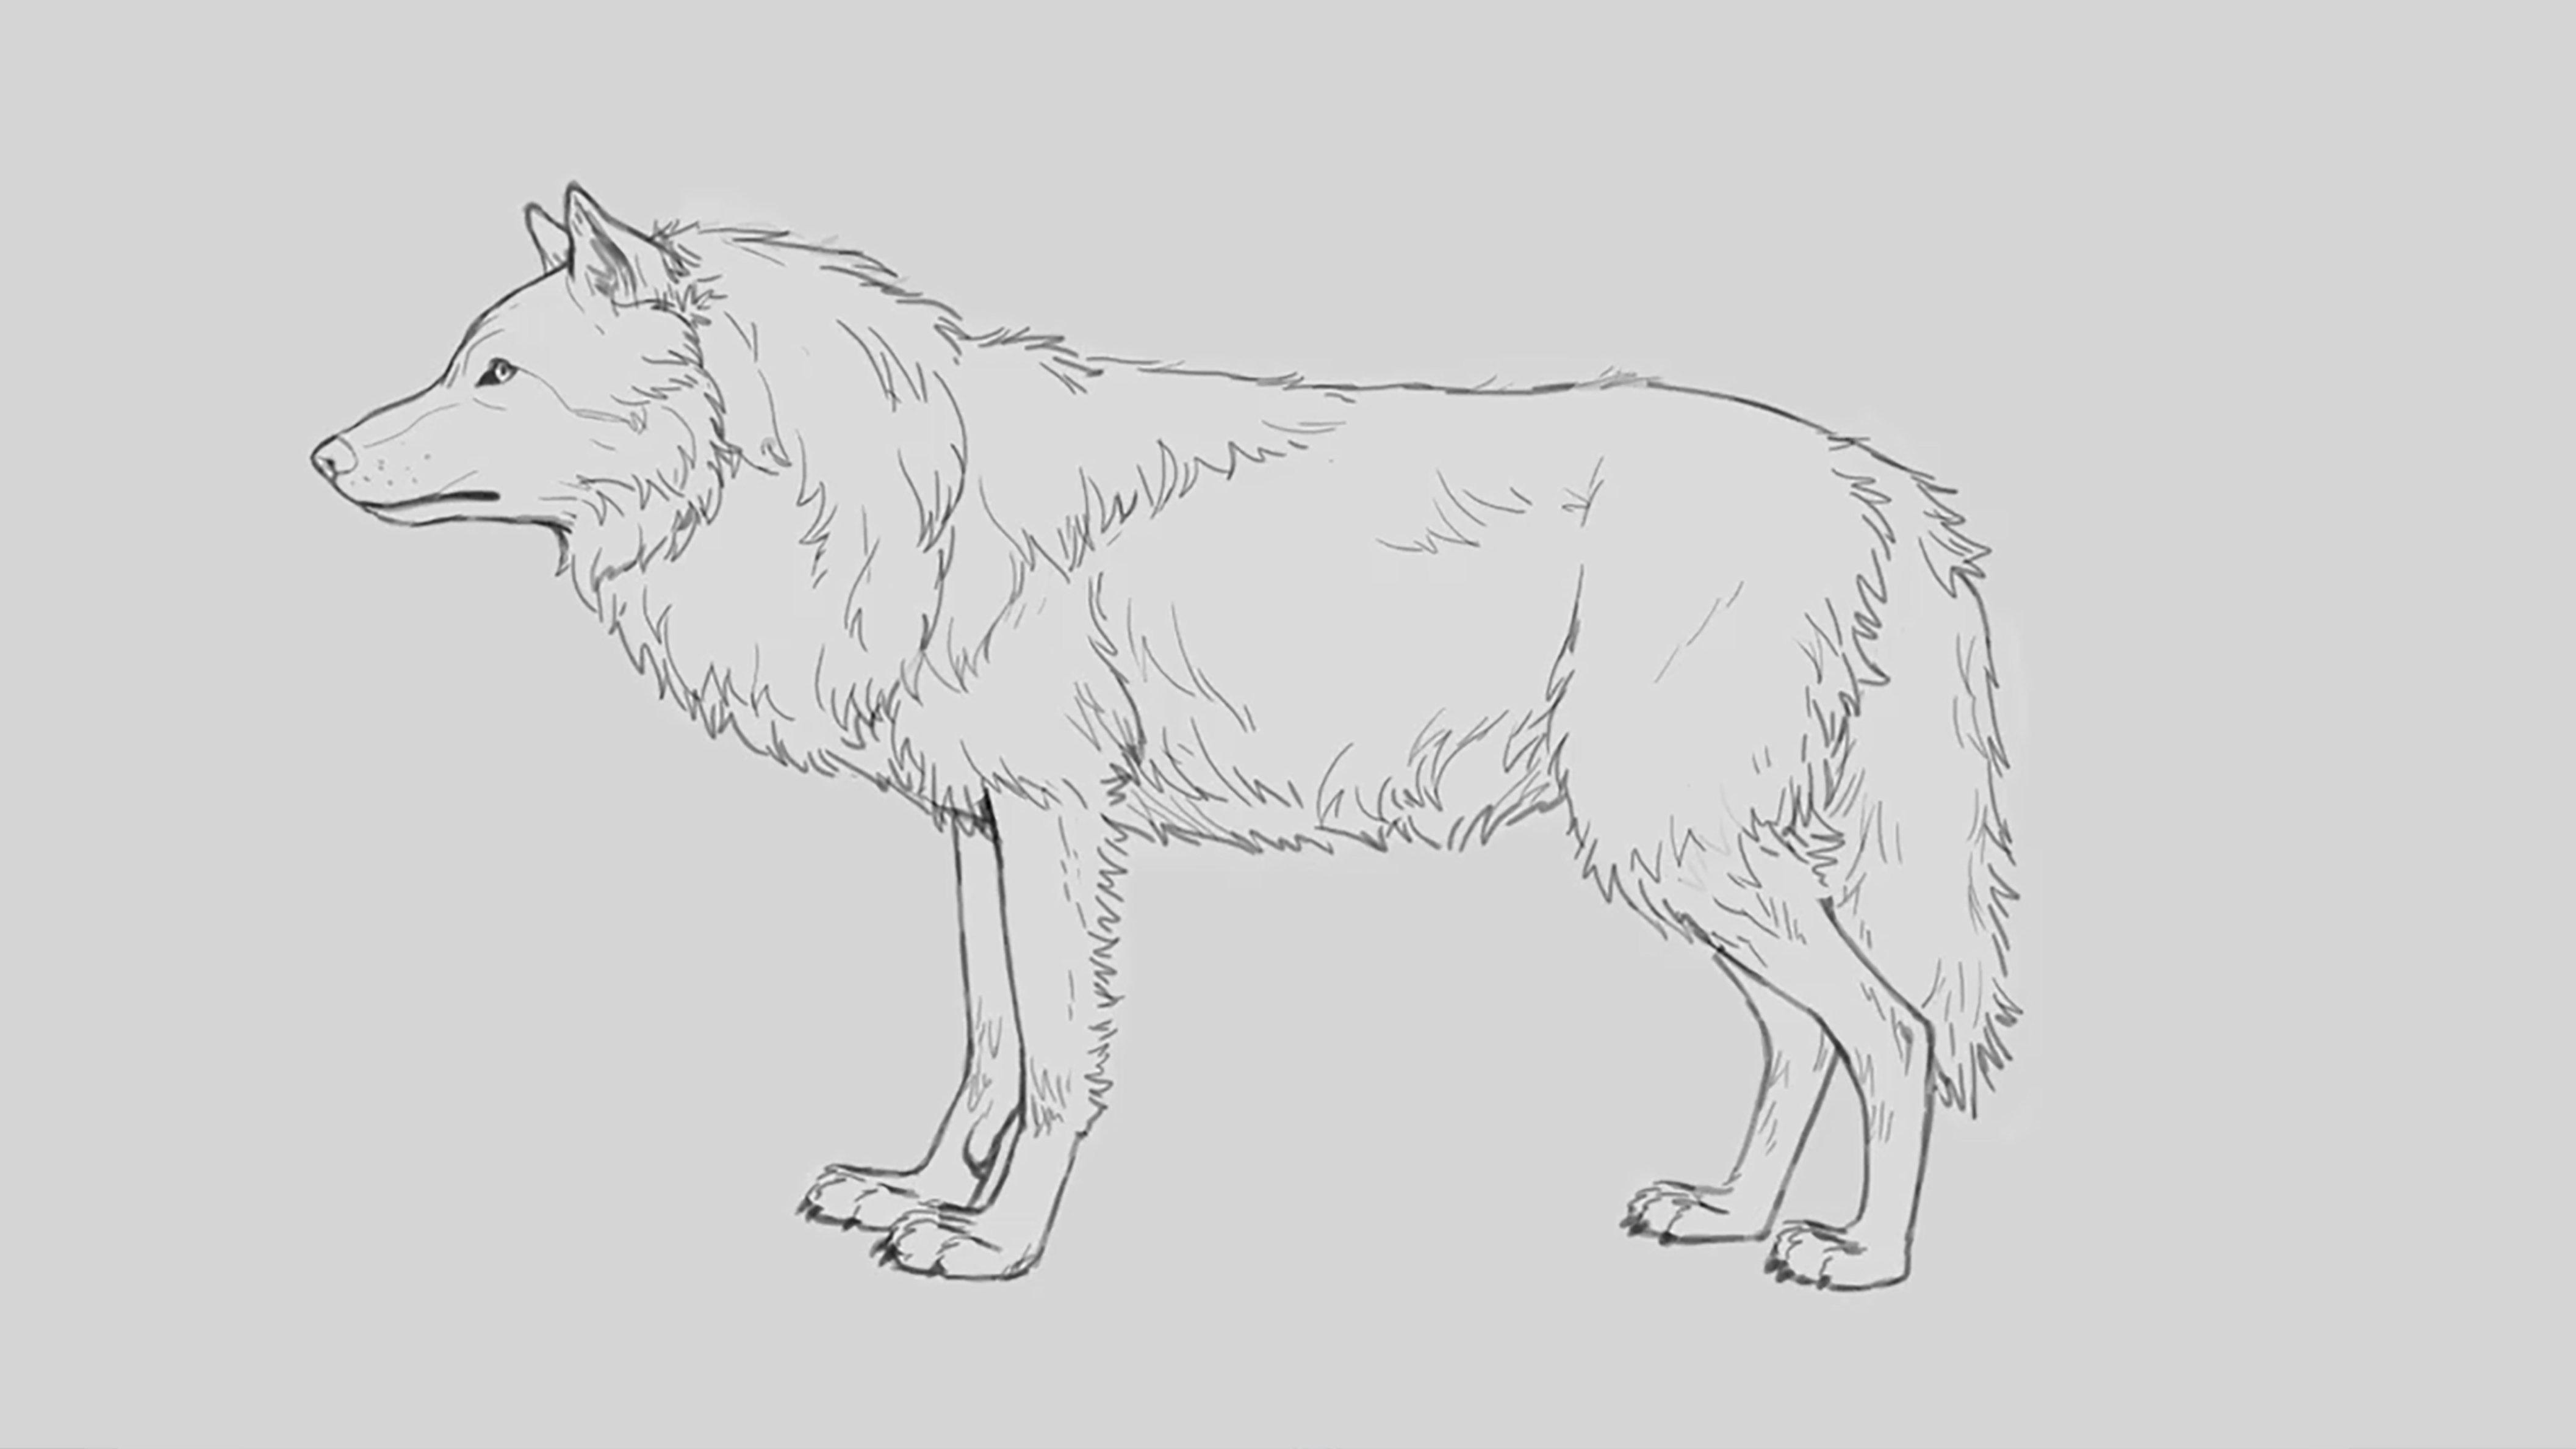 Pencil sketch of a wolf with its full winter coat